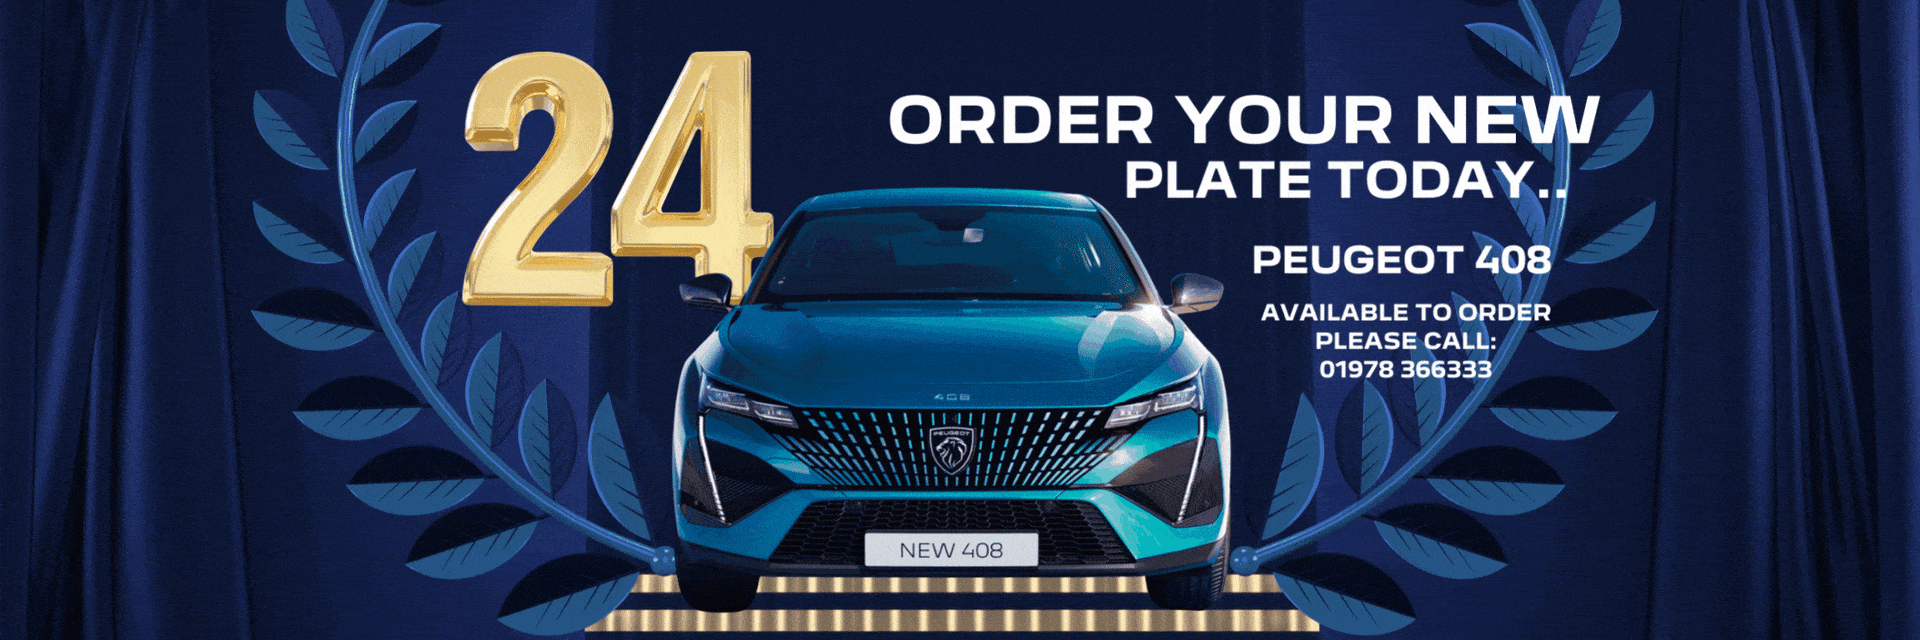 ORDER YOUR NEW 24 PLATE TODAY.